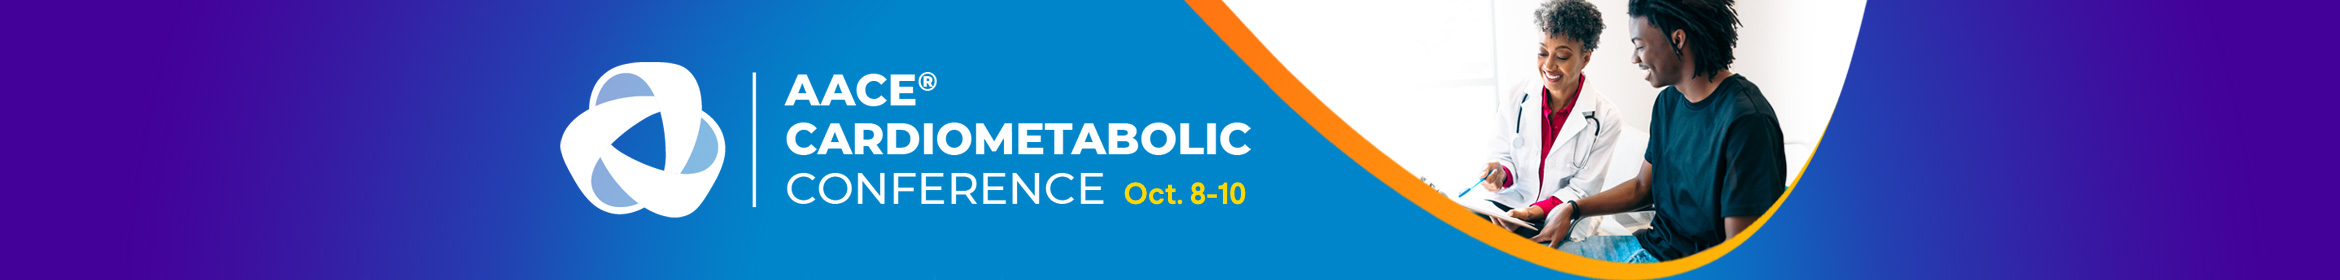 Cardiometabolic Conference Main banner